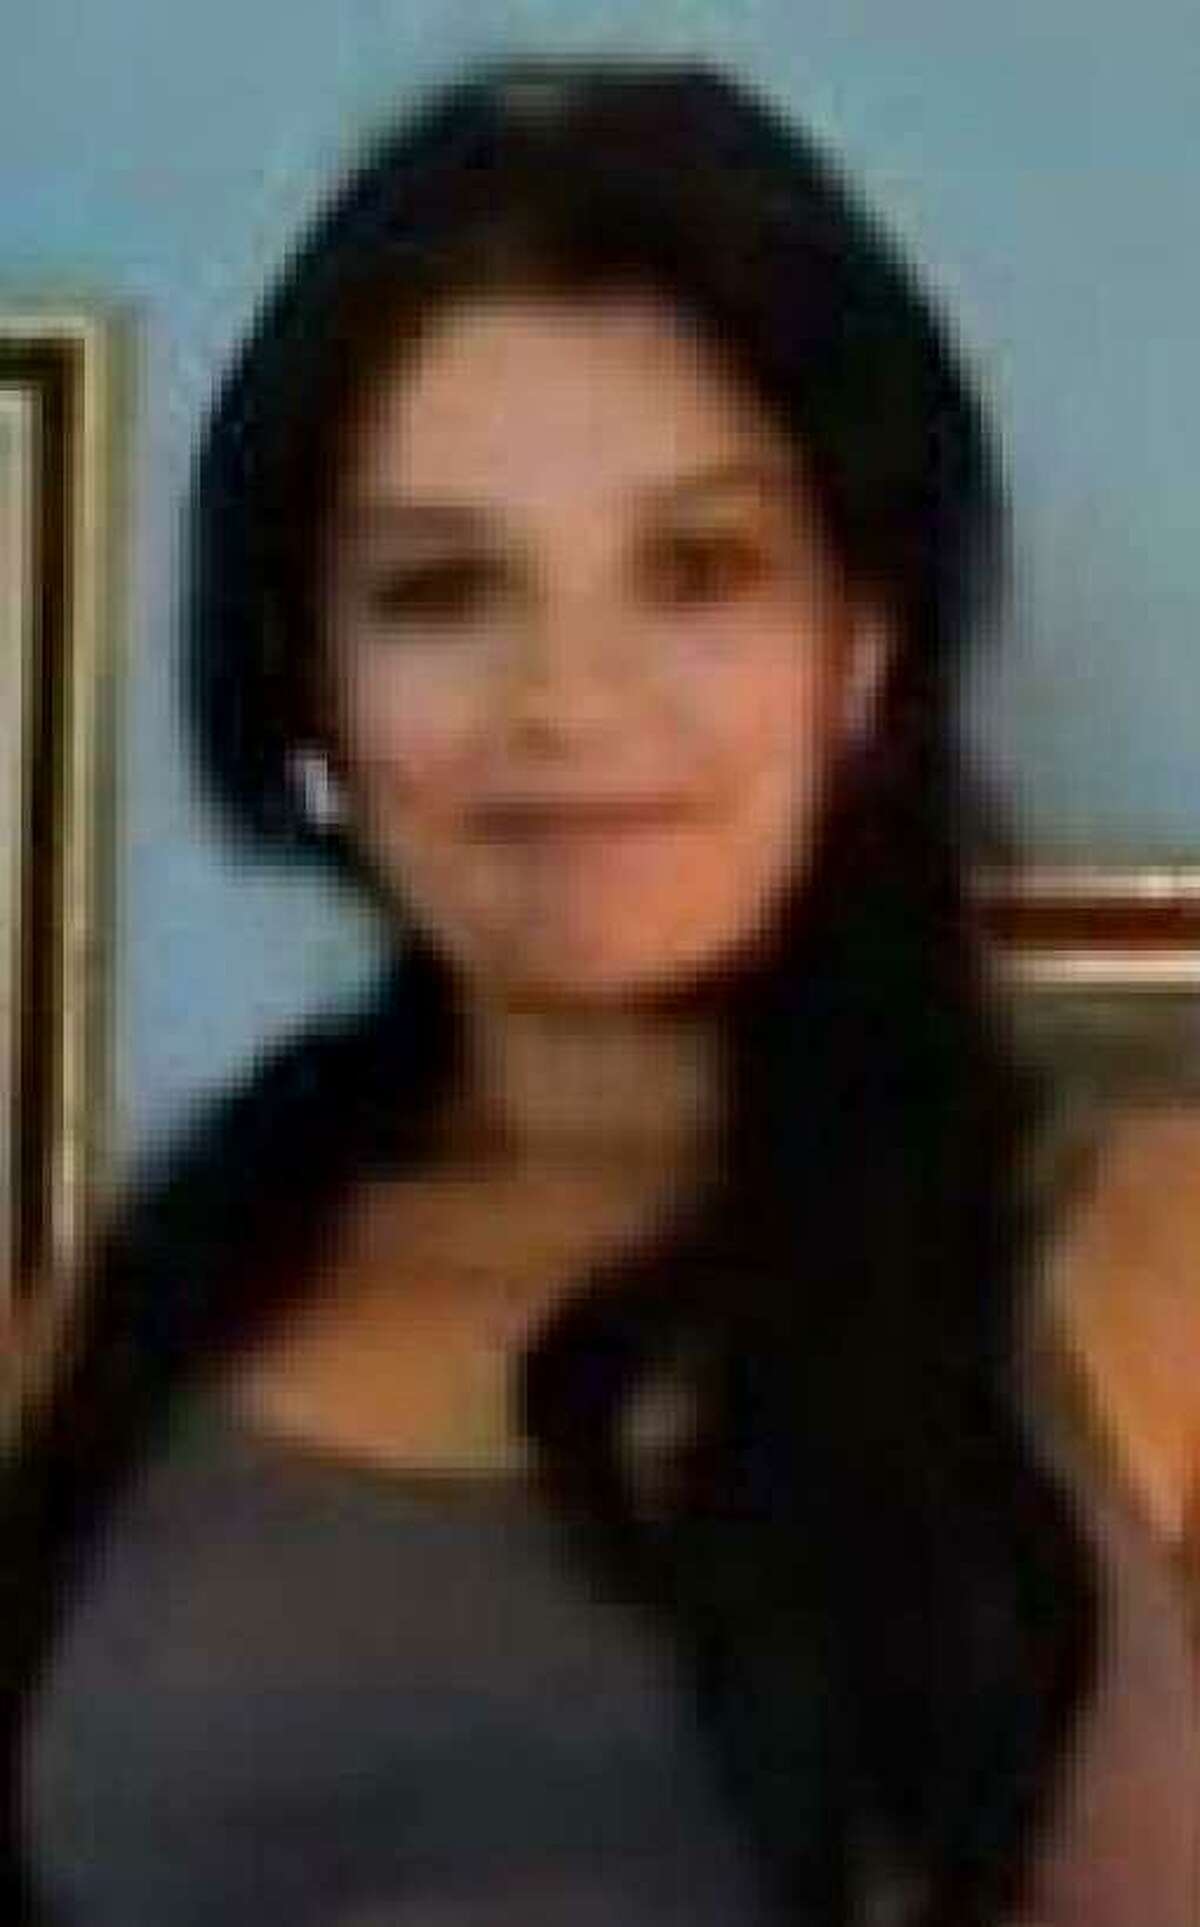 Melissa Ramirez, 29, of Laredo, was found slain on Sept. 4. Her body was found in the 300 block of Jefferies Road, near the intersection with Camino Colombia. Officials say she was the victim of a serial killer and have charged Border Patrol agent Juan David Ortiz with four counts of murder.